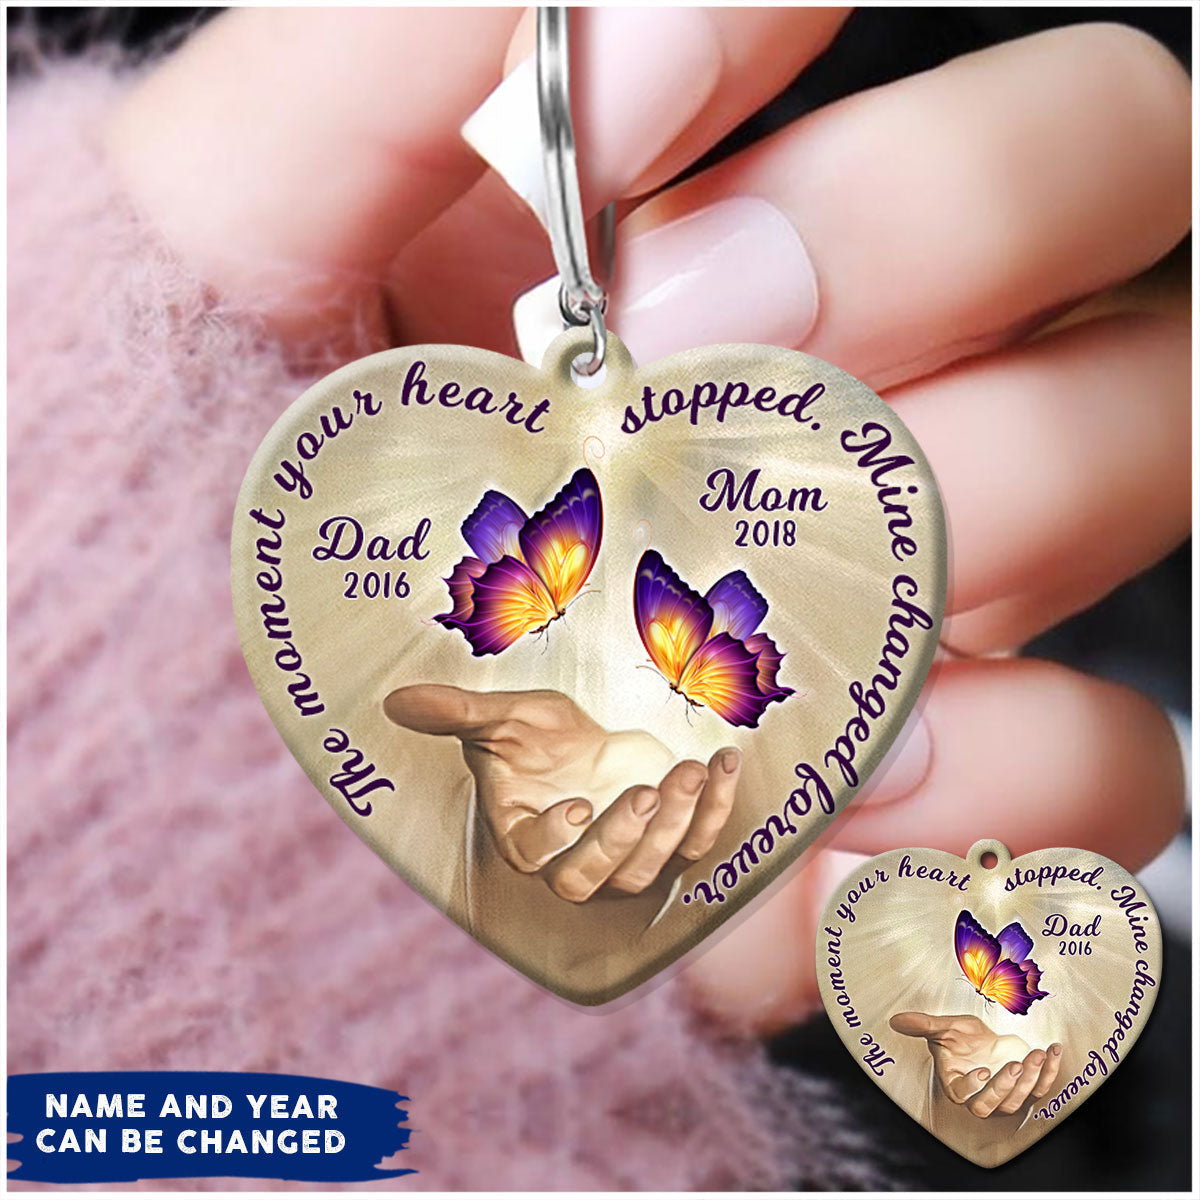 The Moment Your Heart Stopped Personalized Name Keychain